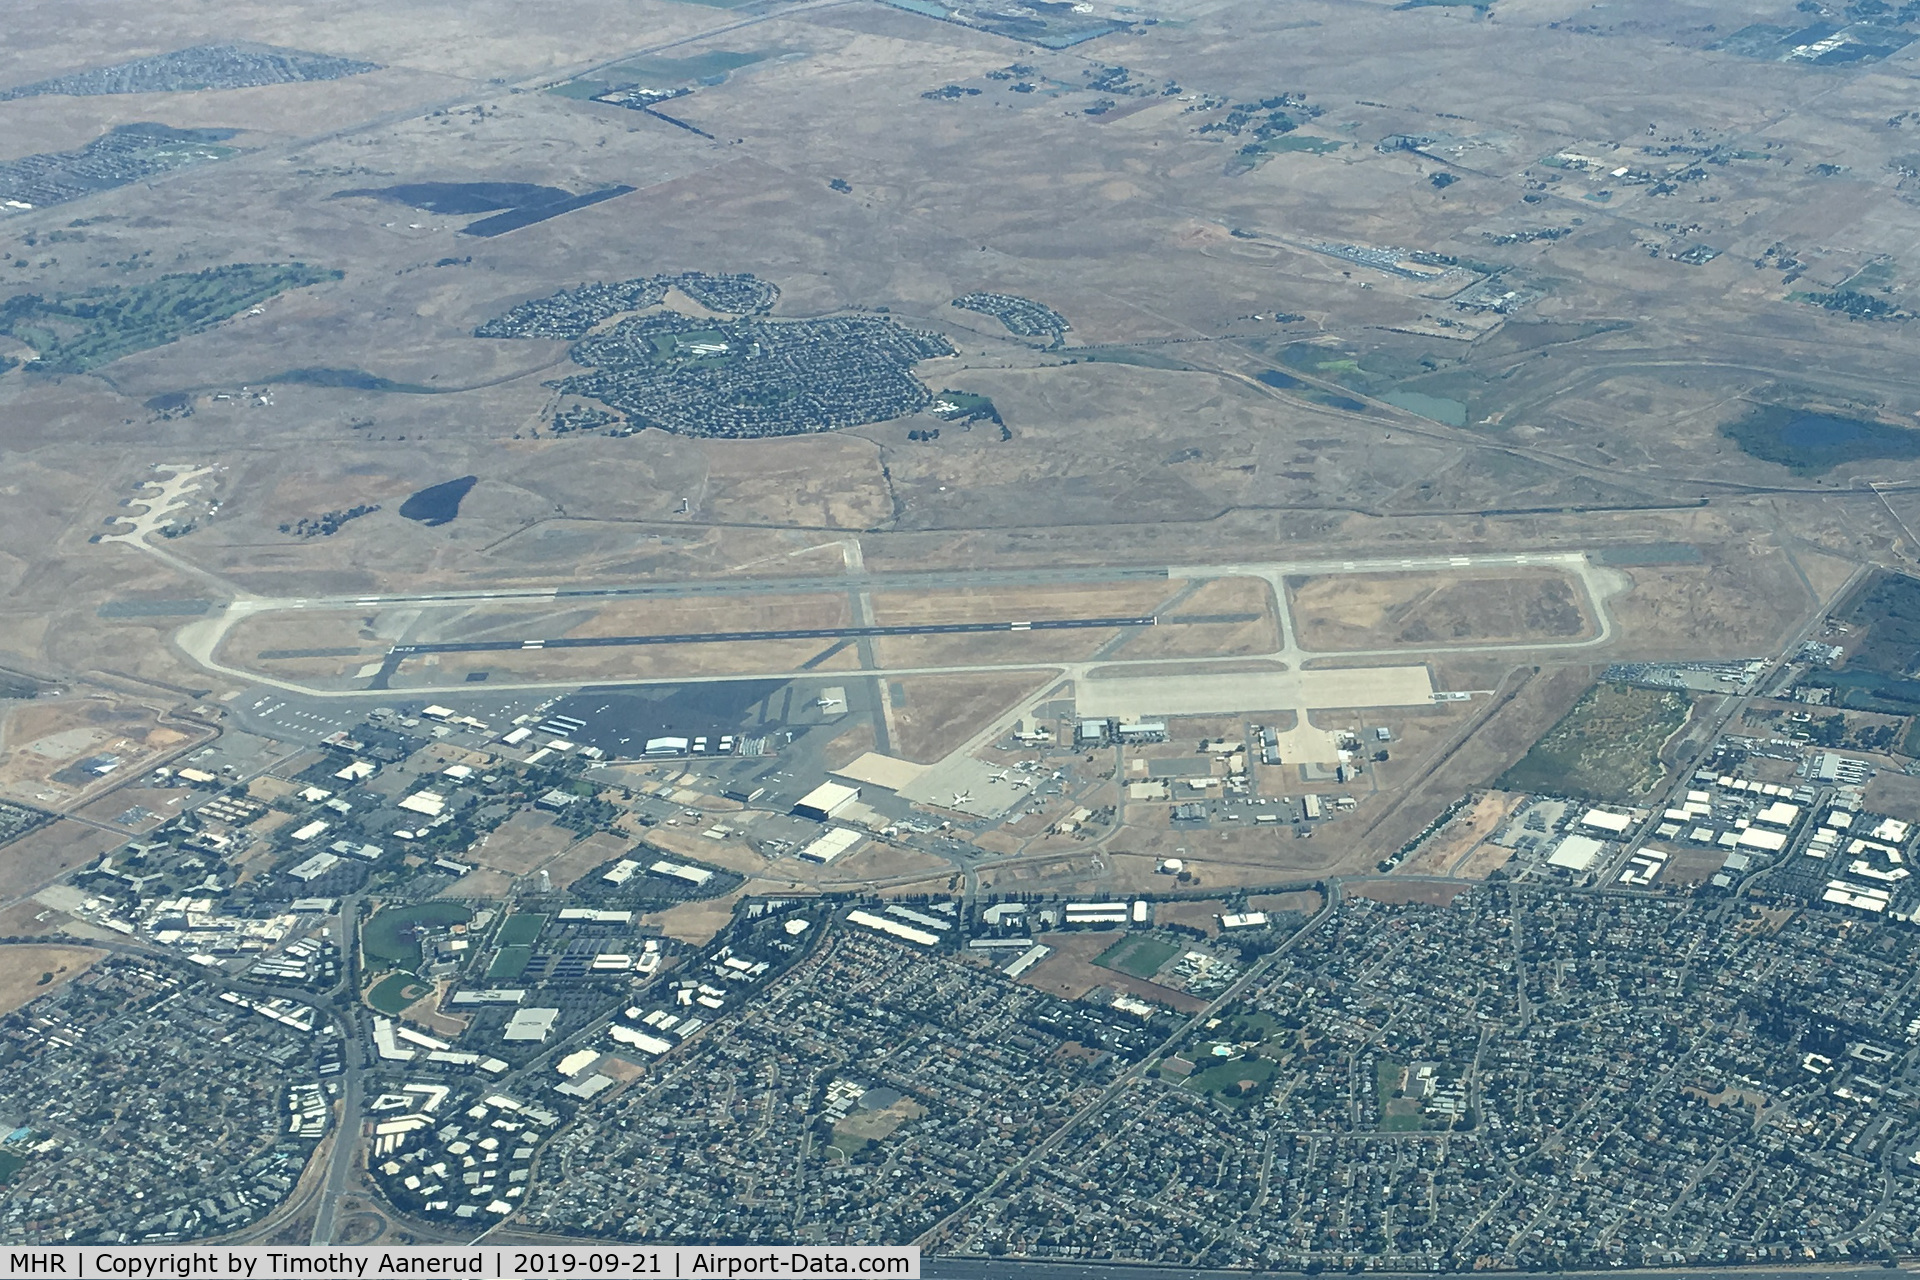 Sacramento Mather Airport (MHR) - Flying by Sacramento Mather airport in a Cessna 182